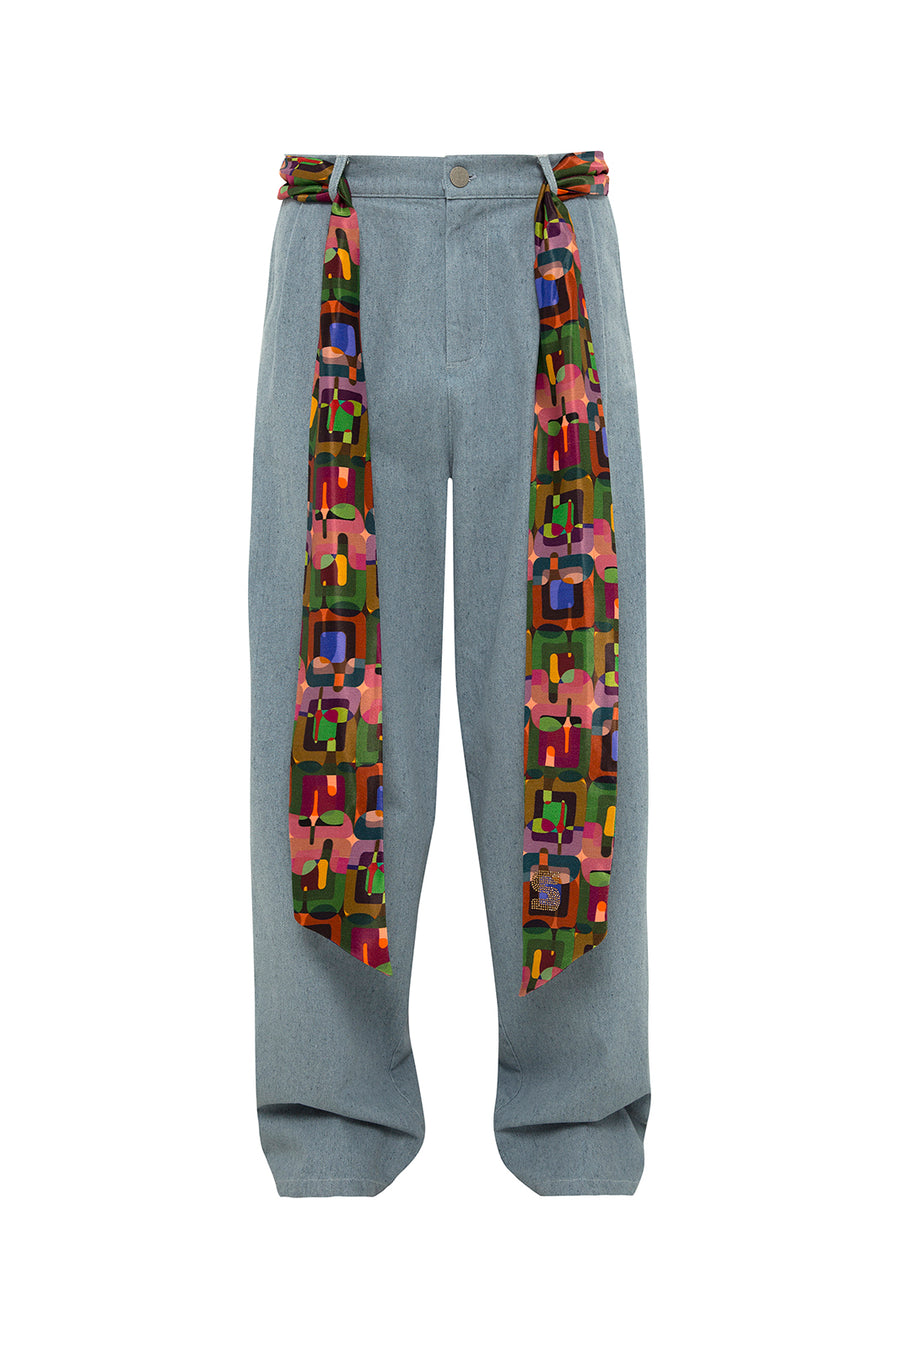 TYRON - Full length jeans with satin printed belt